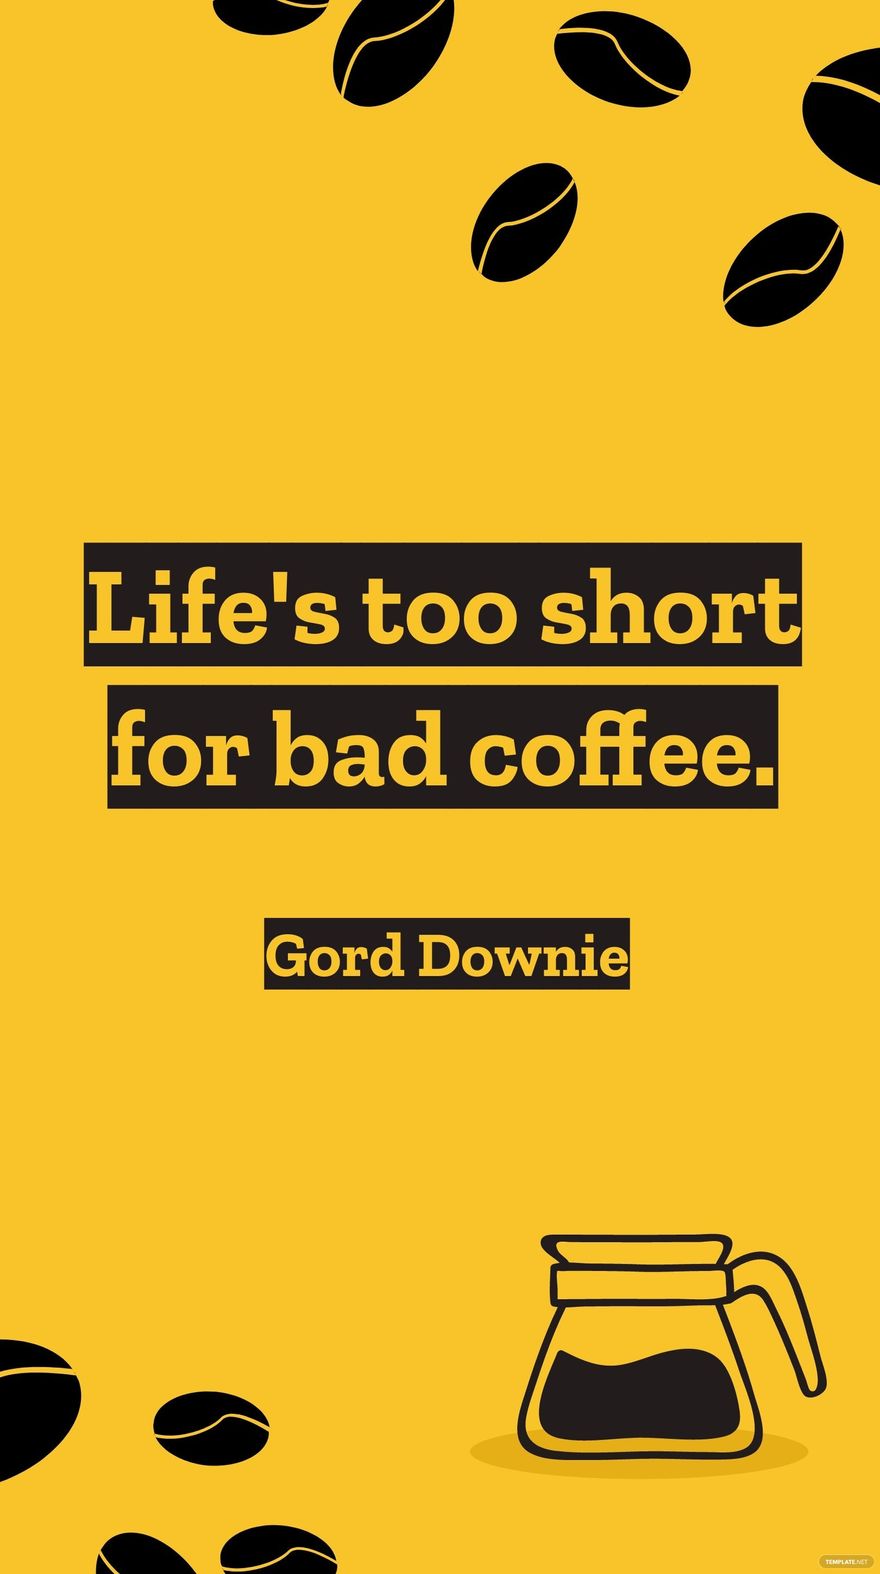 Free Gord Downie - Life's too short for bad coffee. in JPG